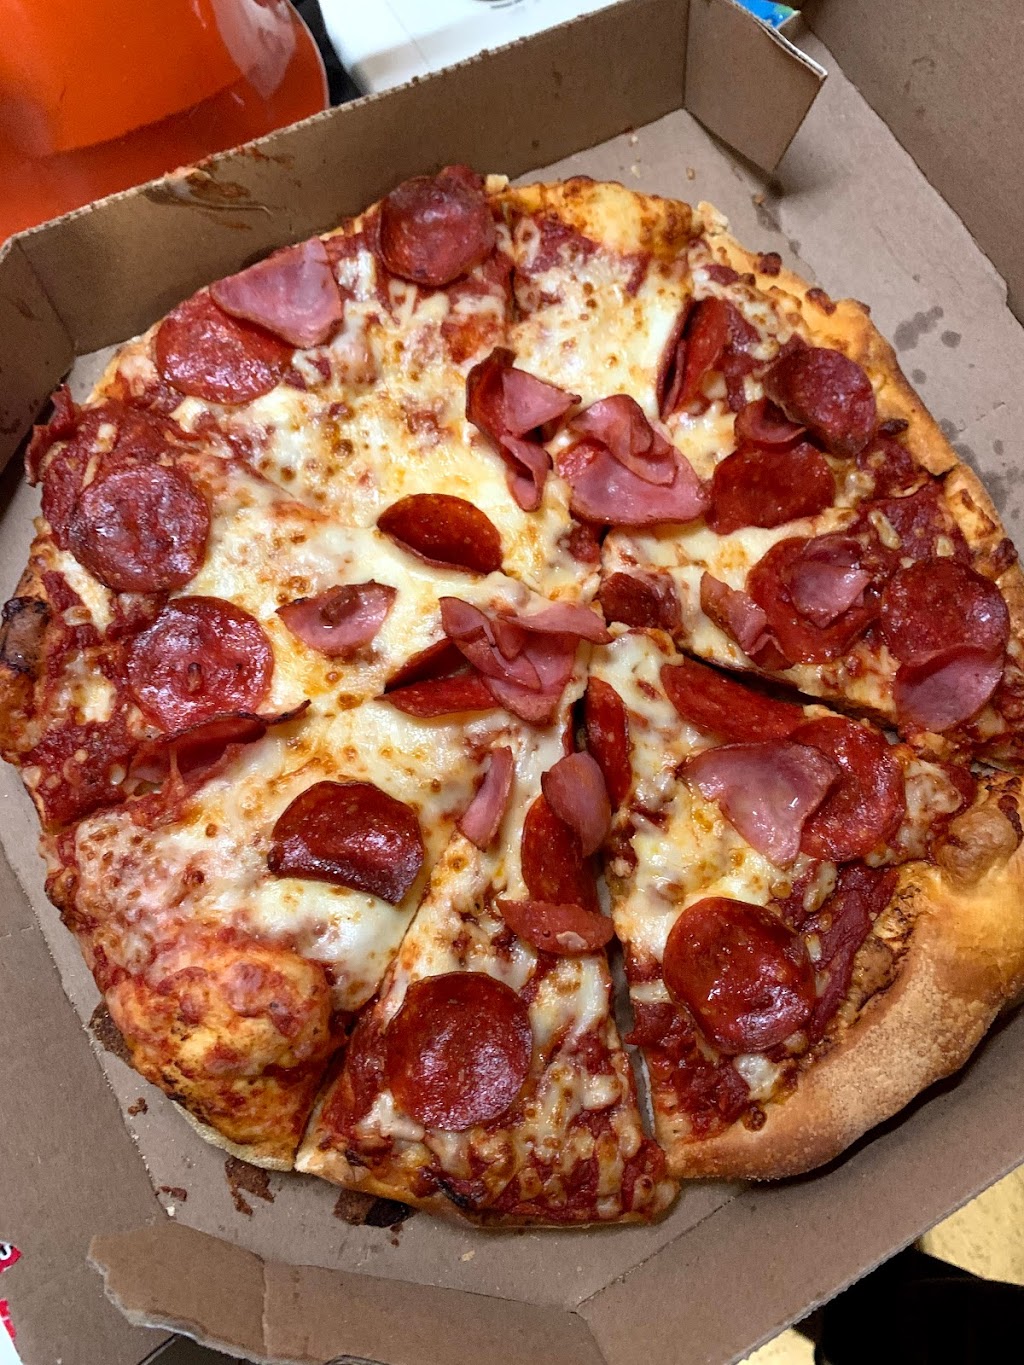 Dominos Pizza | meal takeaway | 1806 S Clack St, Abilene, TX 79605, USA | 3256953030 OR +1 325-695-3030